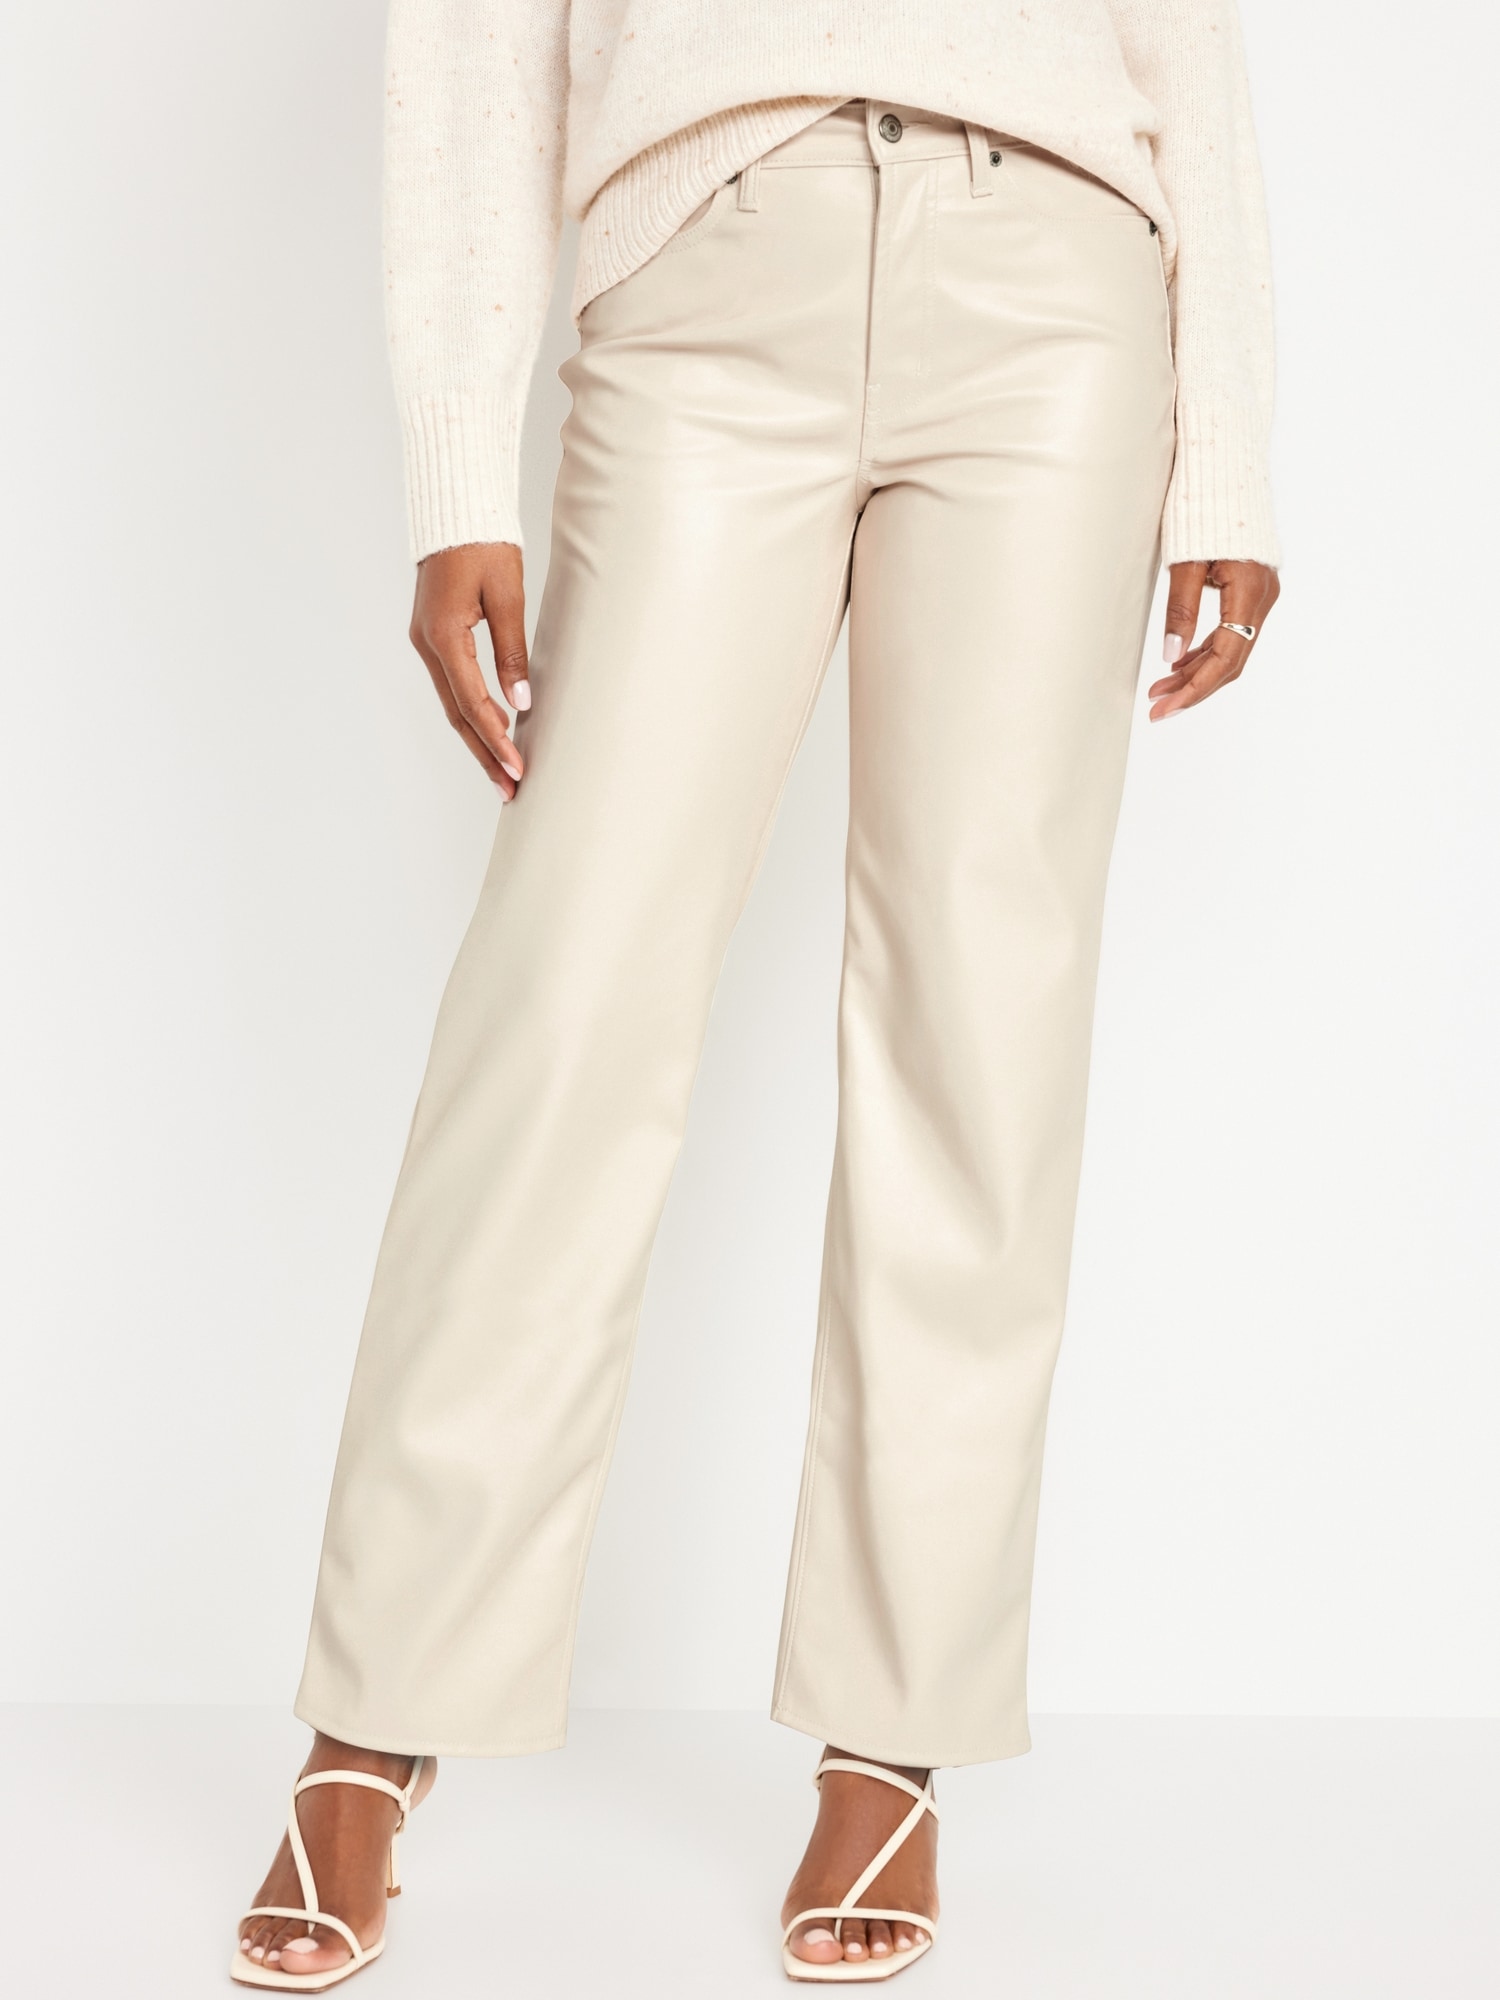 Old Navy High-Waisted Faux-Leather Panel Leggings For Women